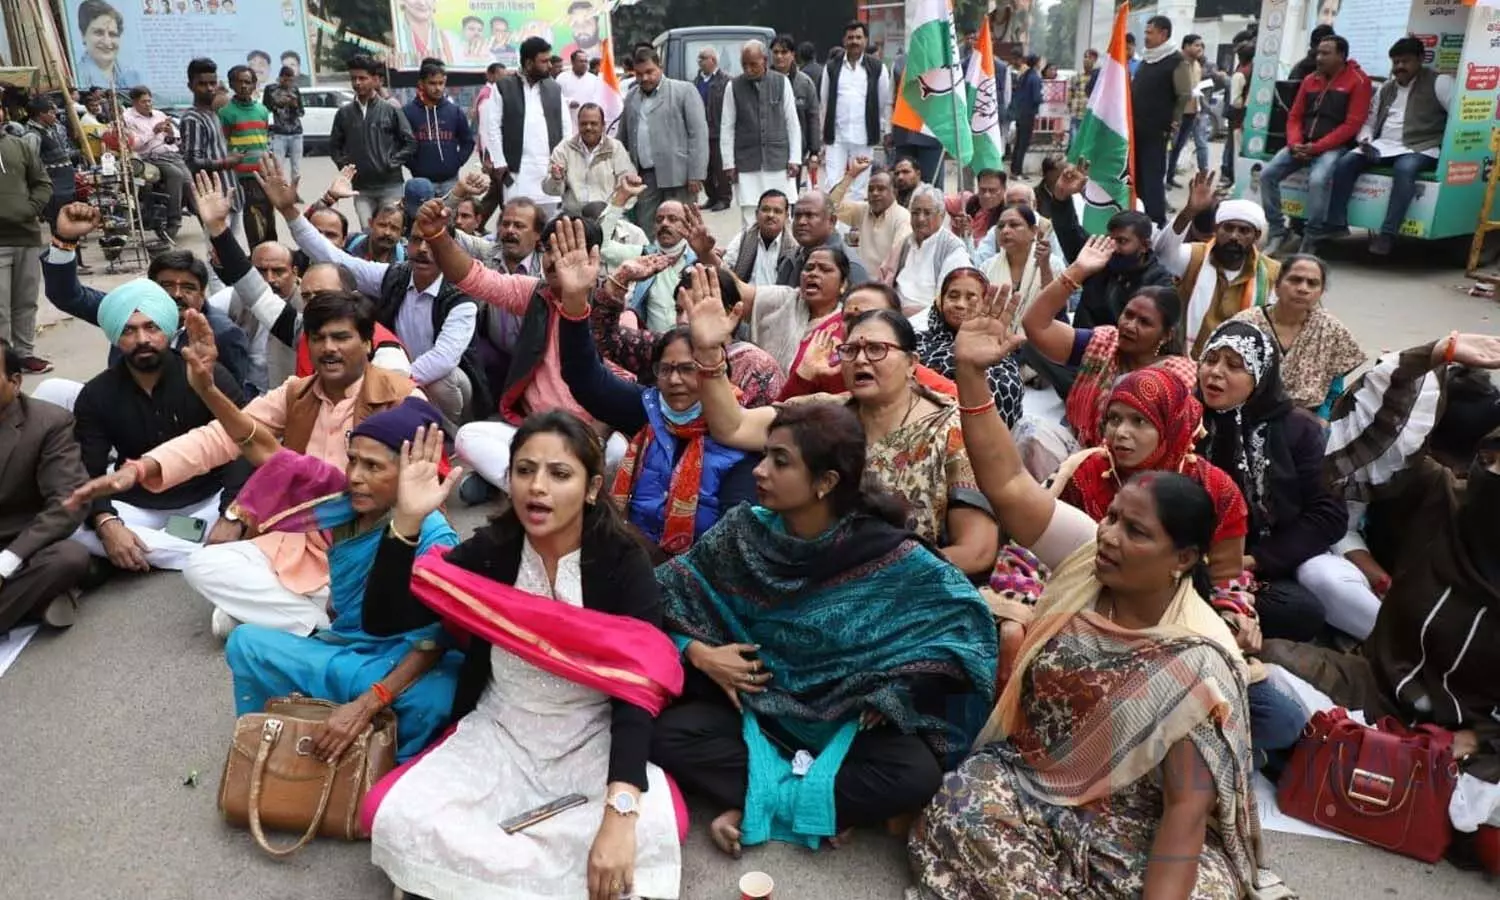 Lucknow News: Congress workers sitting on dharna demanding the dismissal of Minister of State for Home Ajay Mishra Teni, see photos